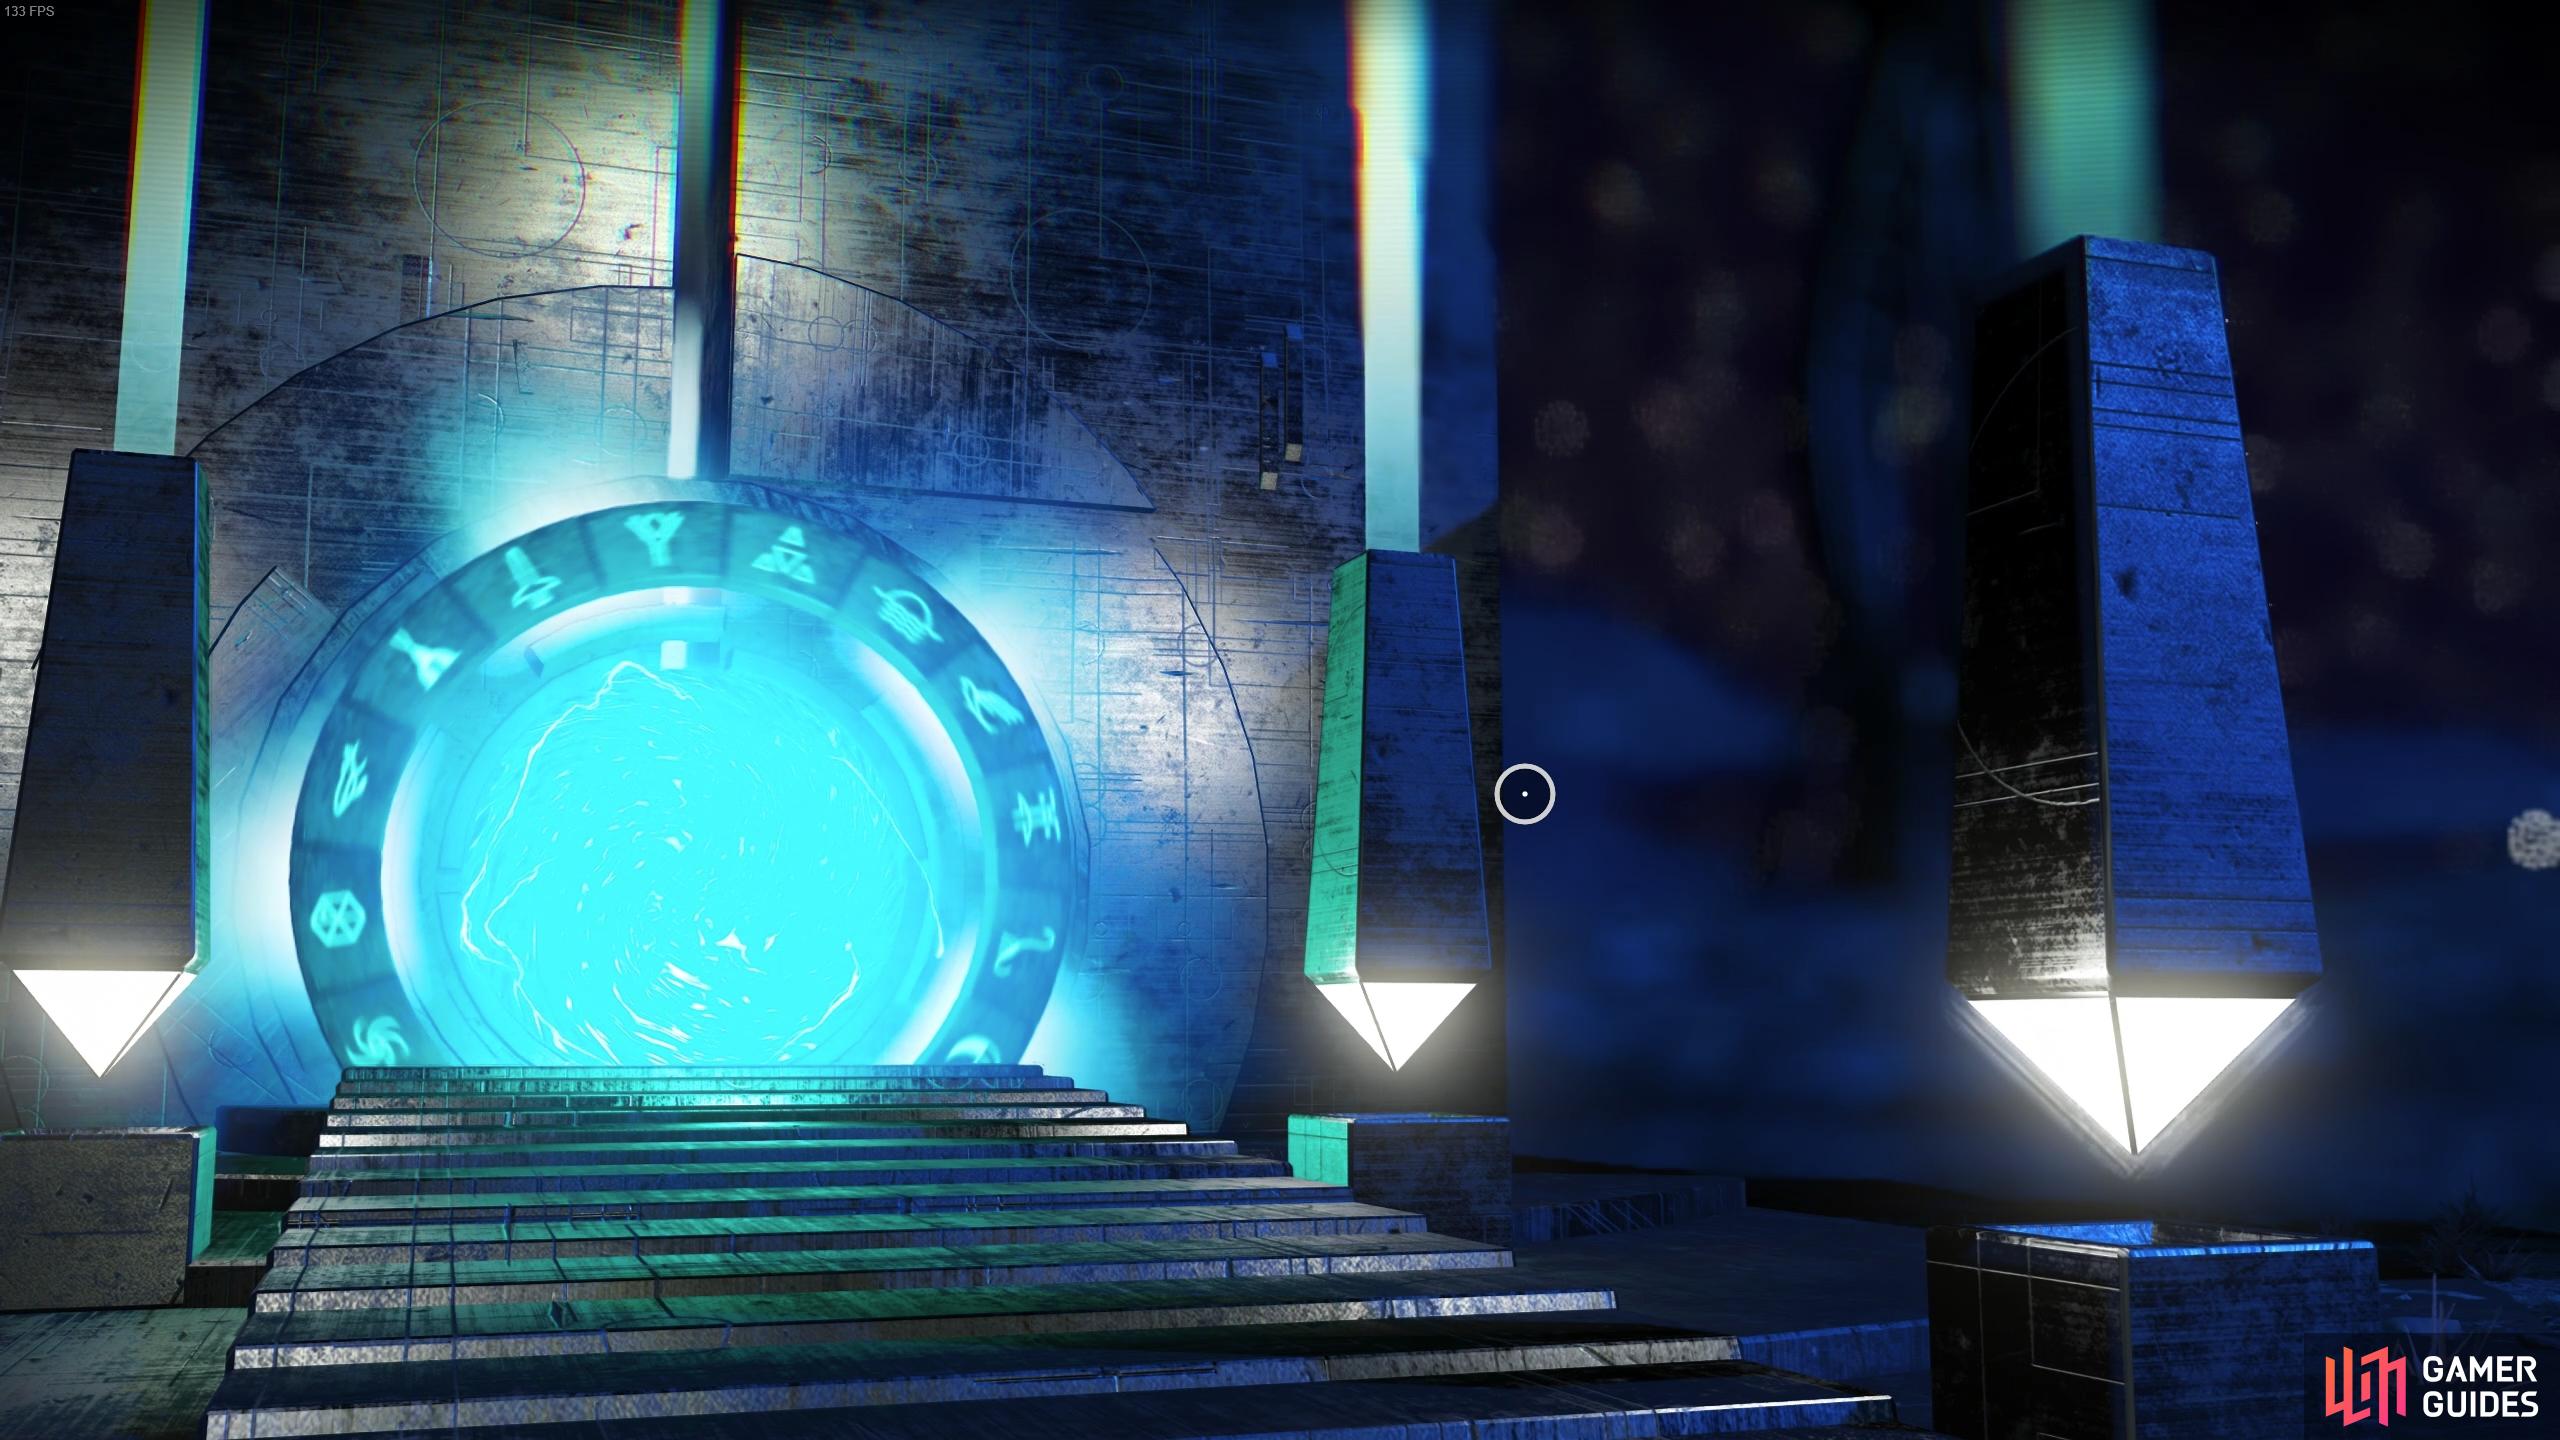 Find a portal and enter it to reach a new planet.